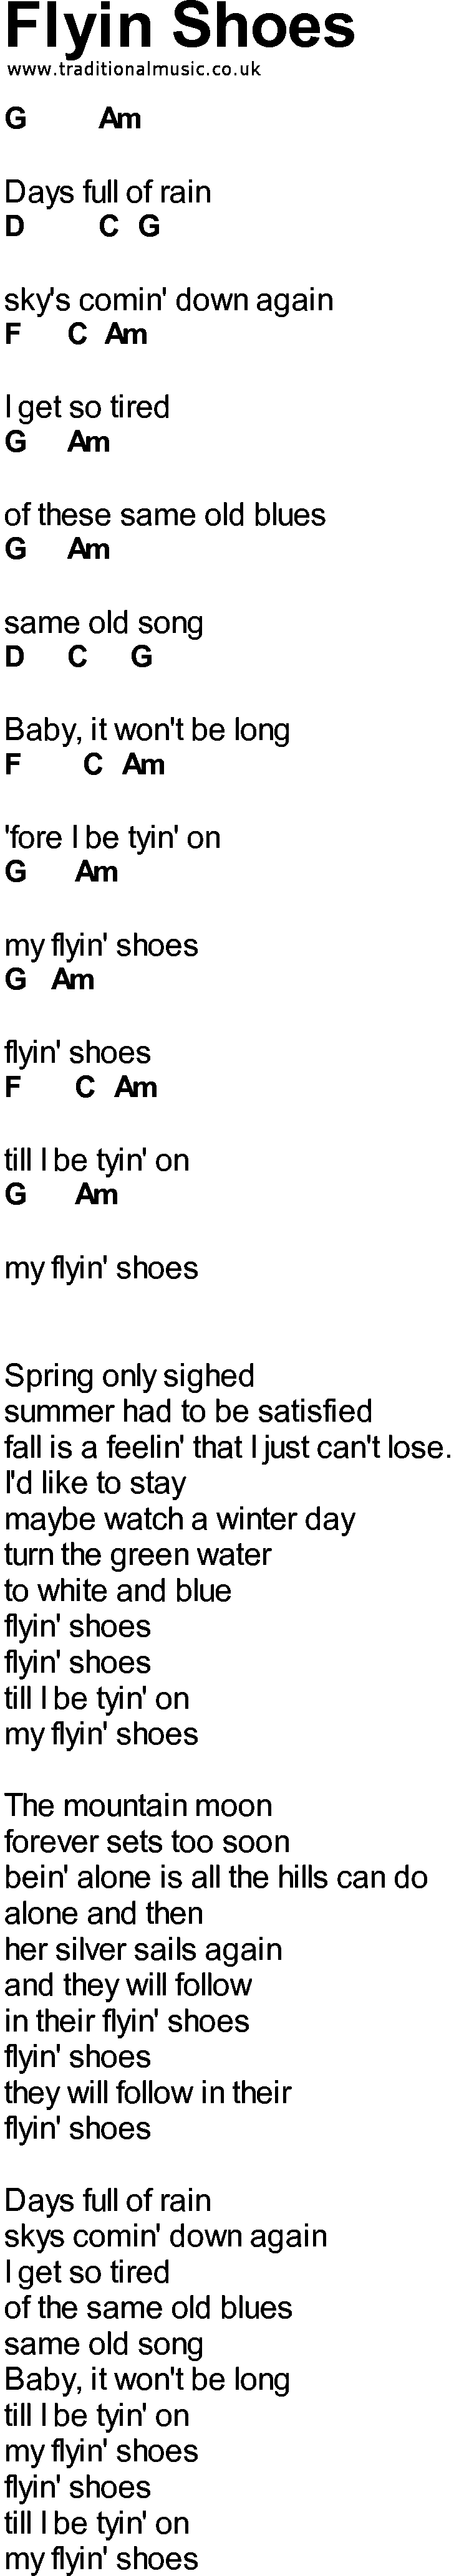 Bluegrass songs with chords - Flyin Shoes